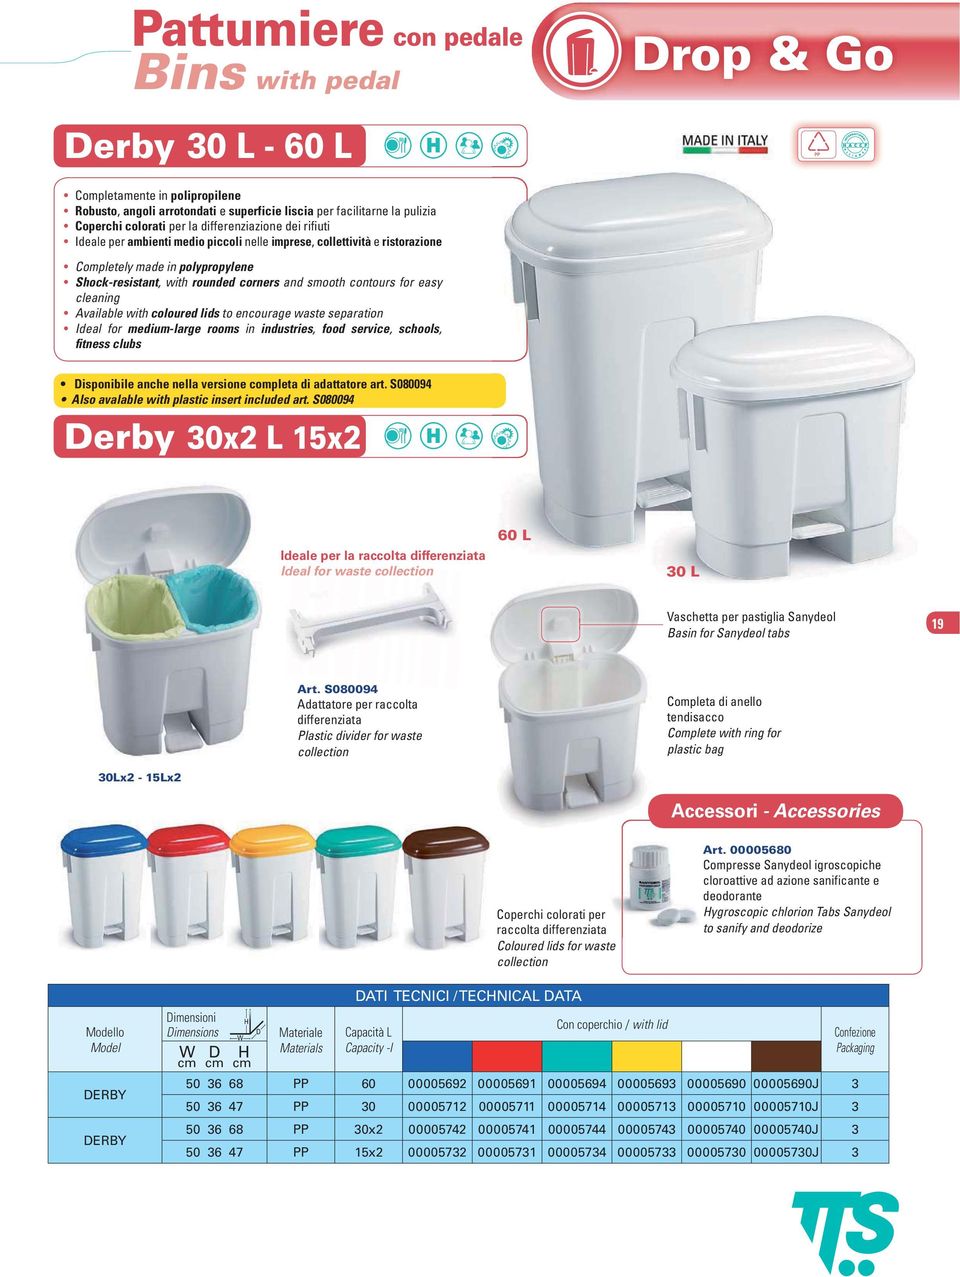 for easy cleaning Available with coloured lids to encourage waste separation Ideal for medium-large rooms in industries, food service, schools, fitness clubs Derby 30x2 L 15x2 Ideale per la raccolta